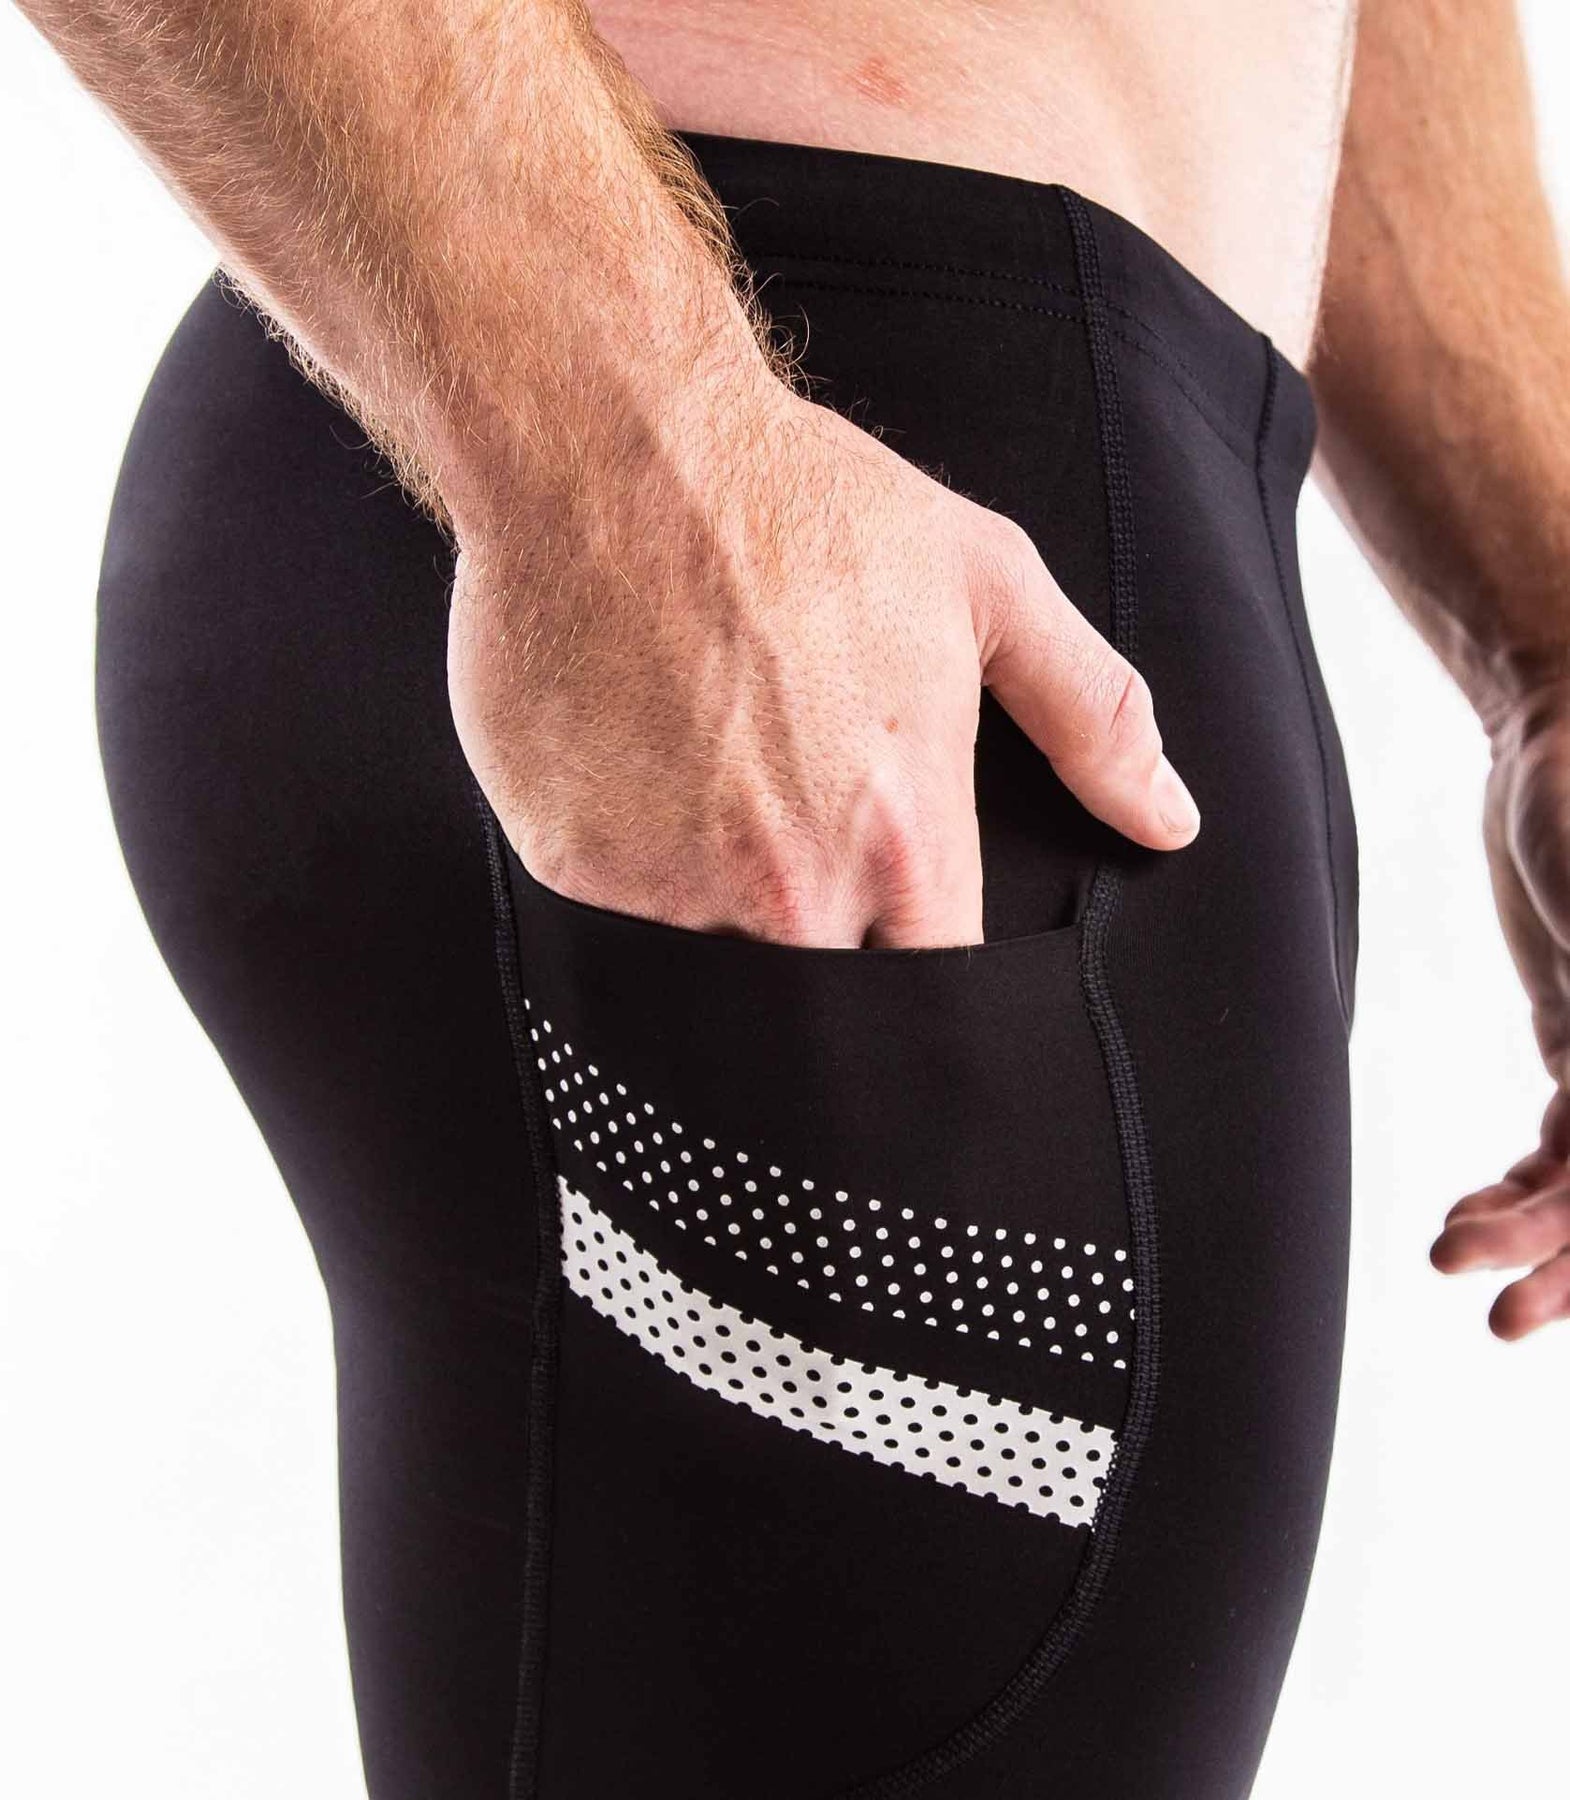 ALL NEW, Men's CoolJade Racer 3/4 Length Compression Tech Pant. Link in  bio., Athlete // @smeric17, …